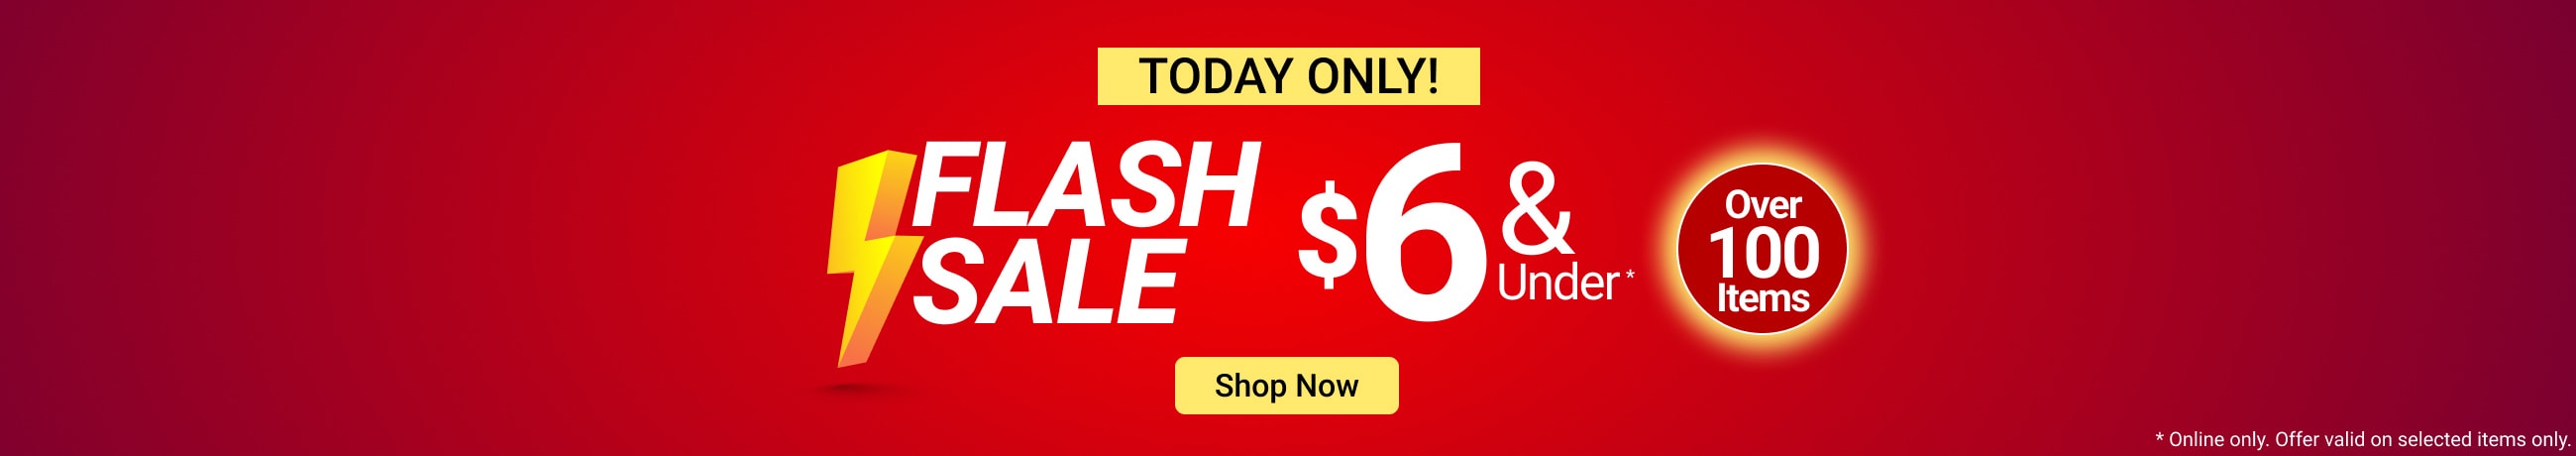 $6 and under Flash Sale - shop now